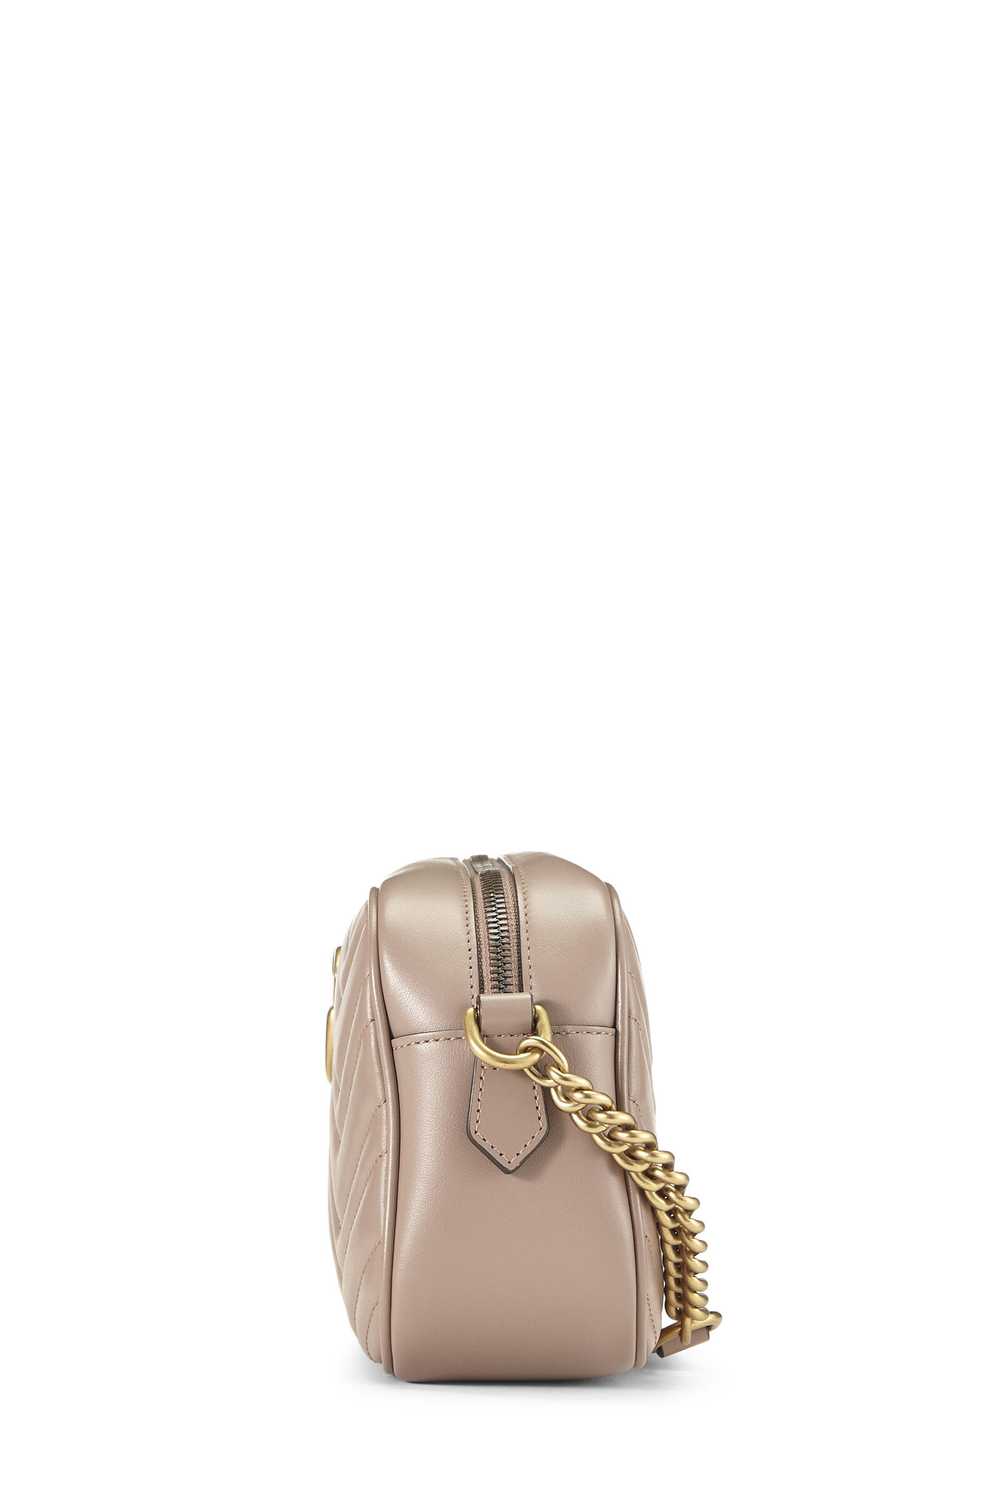 Pink Leather GG Marmont Crossbody - image 3